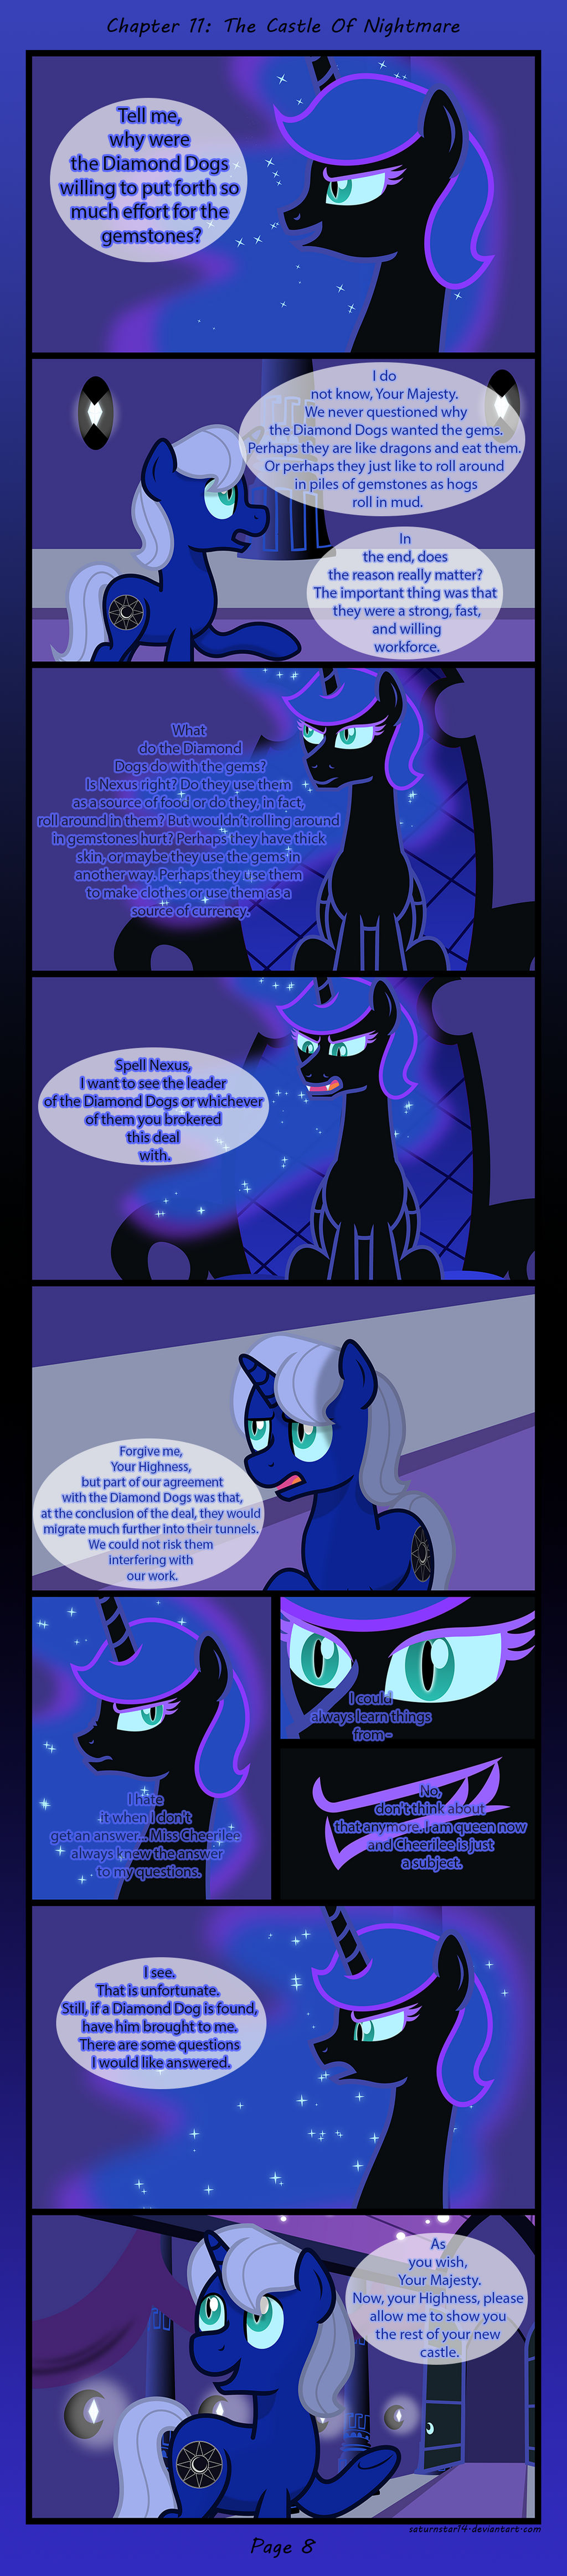 Past Sins: The Castle Of Nightmare P8 by SpokenMind93 on DeviantArt